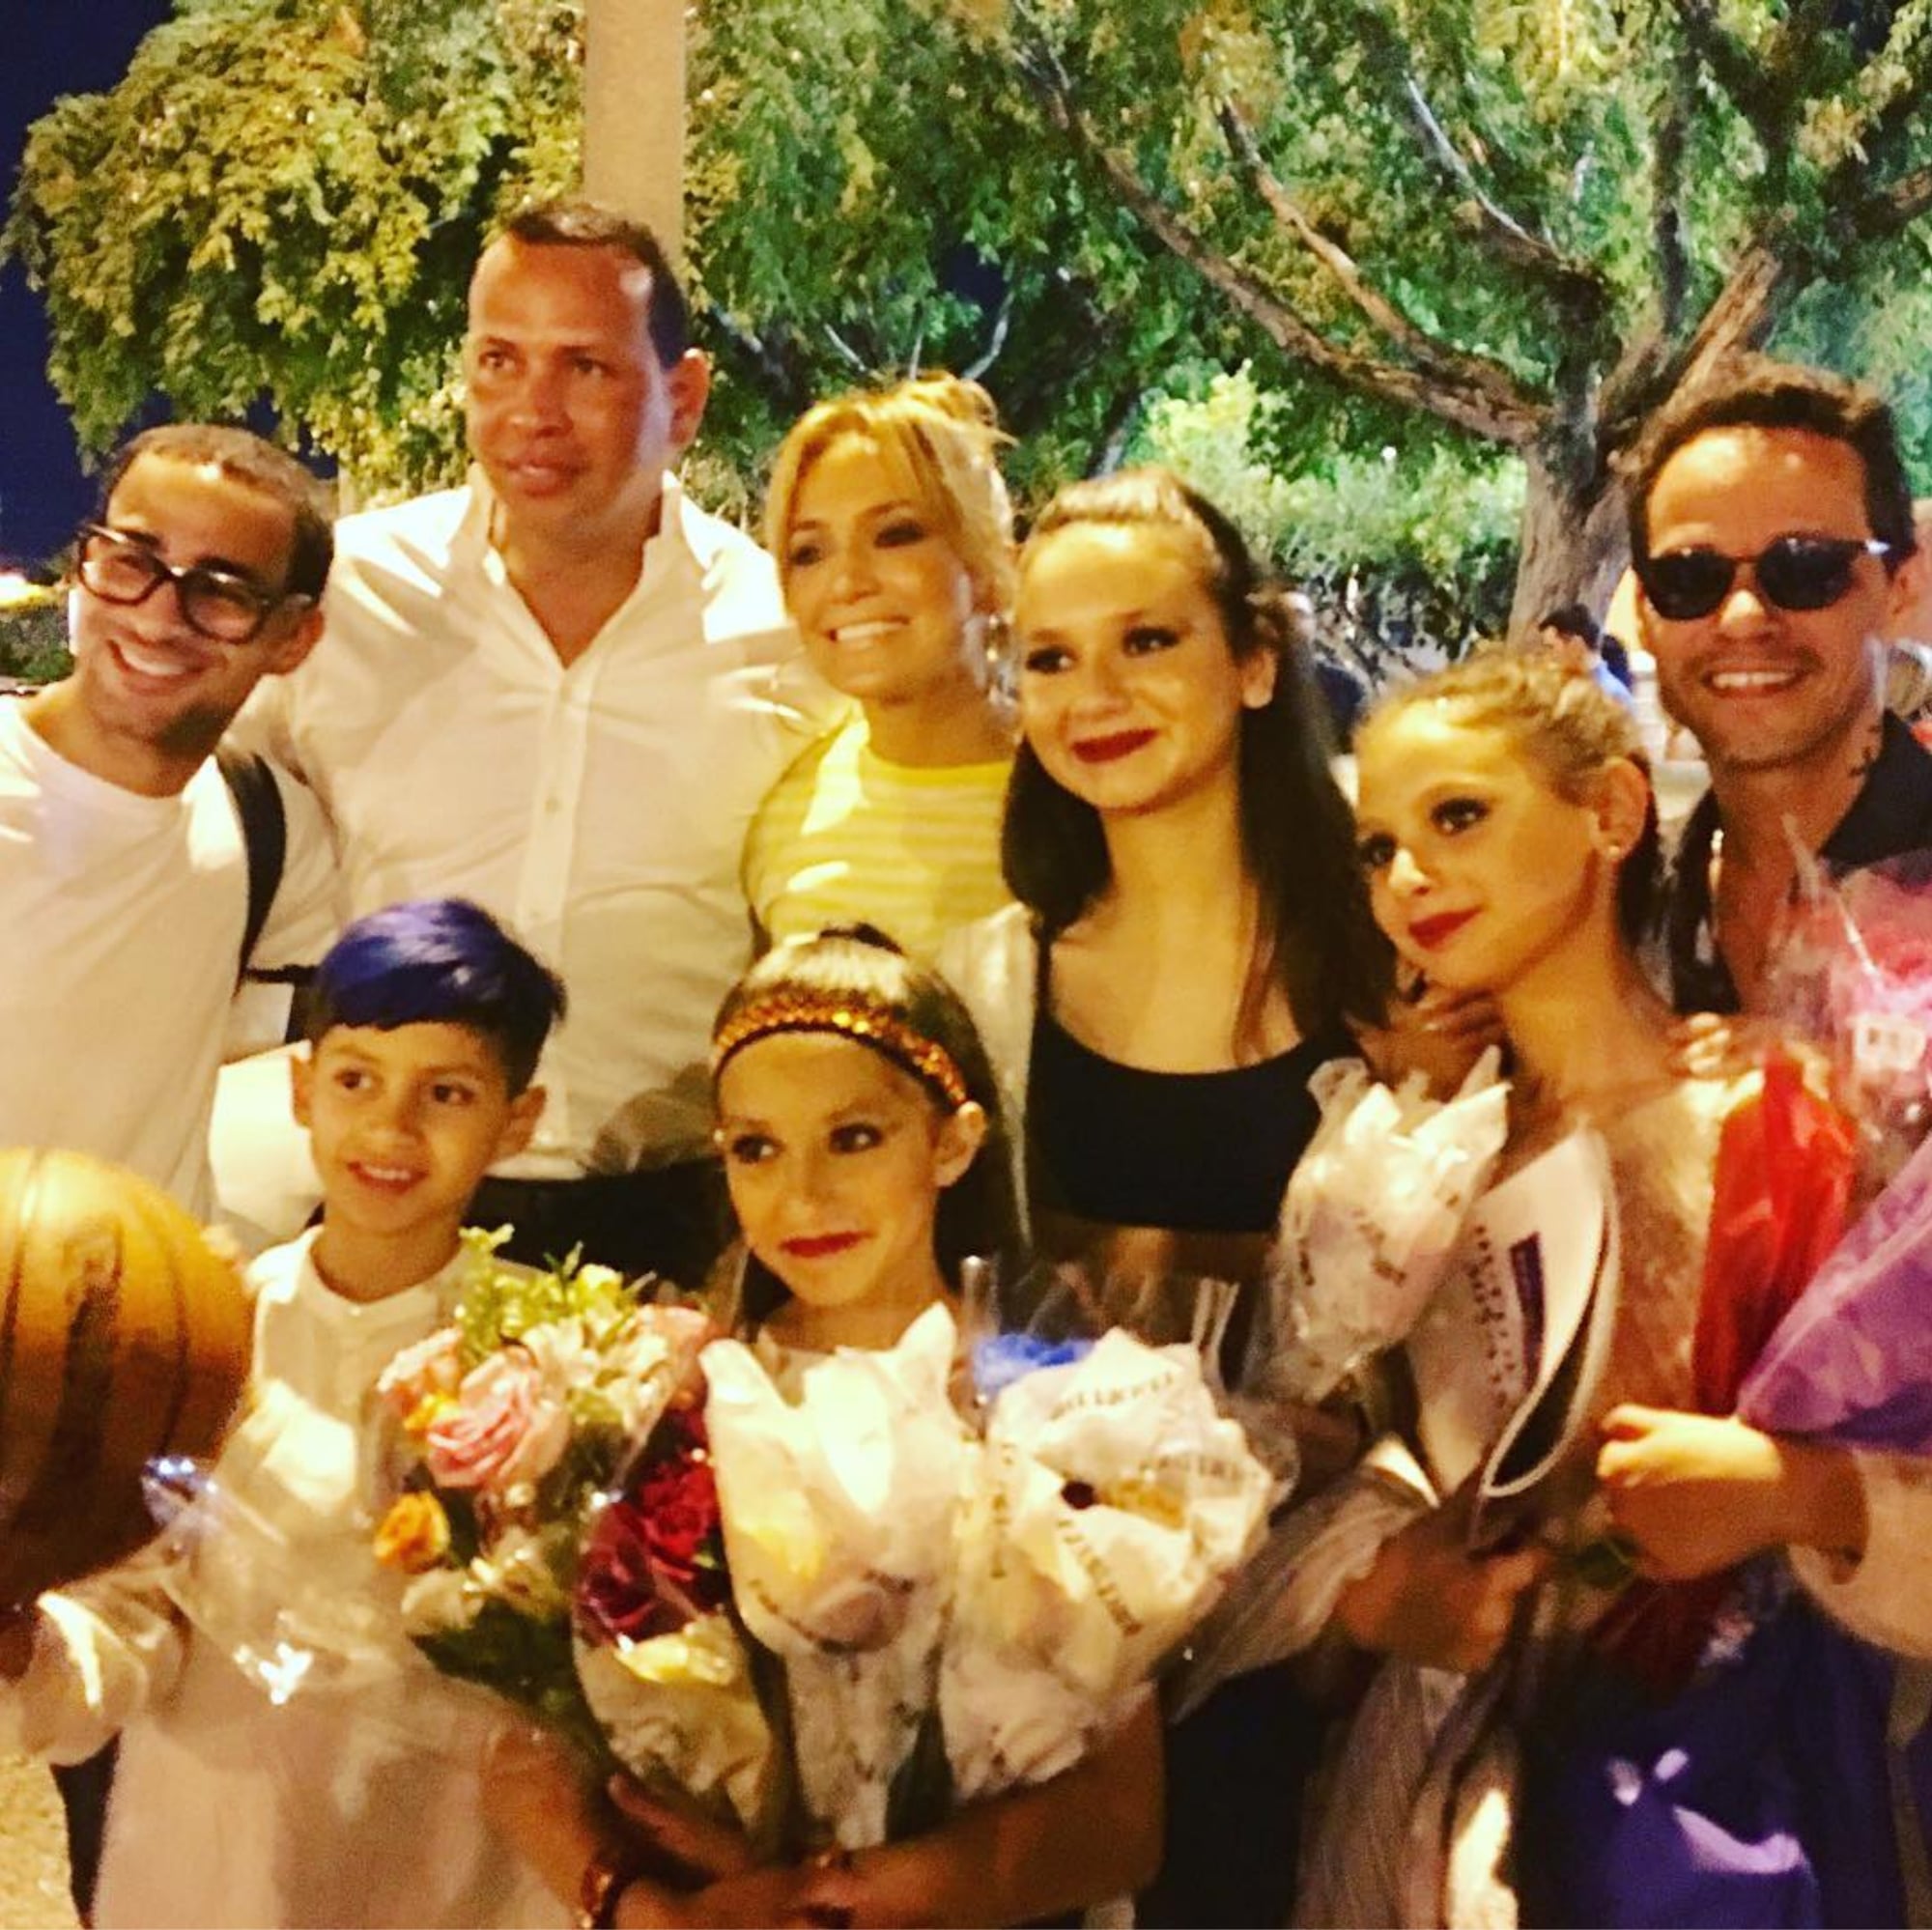 Alex Rodriguez gets nostalgic about his two daughters Natasha, 16, and  Ella, 12 on Instagram